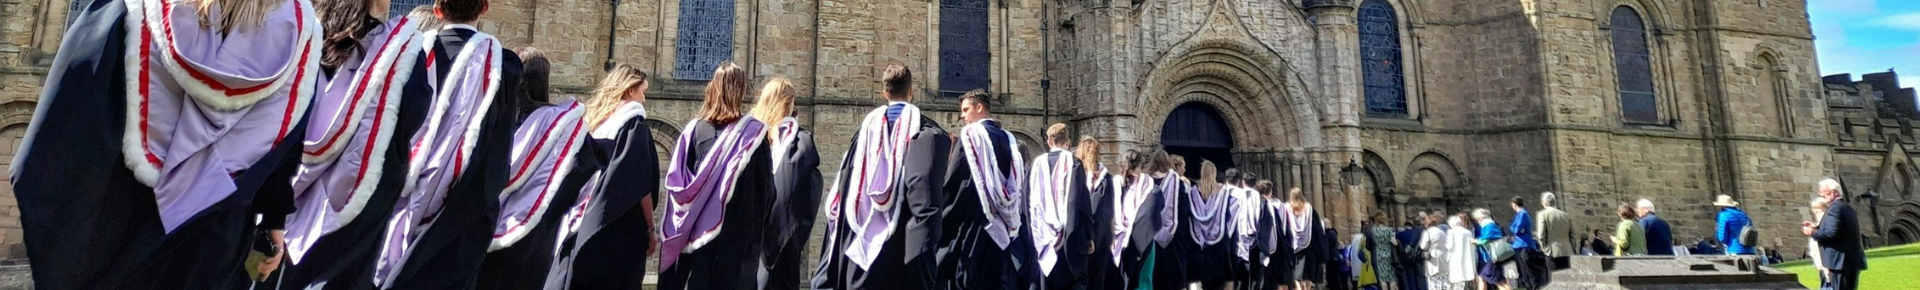 Students in gowns entering Durham Cathedral